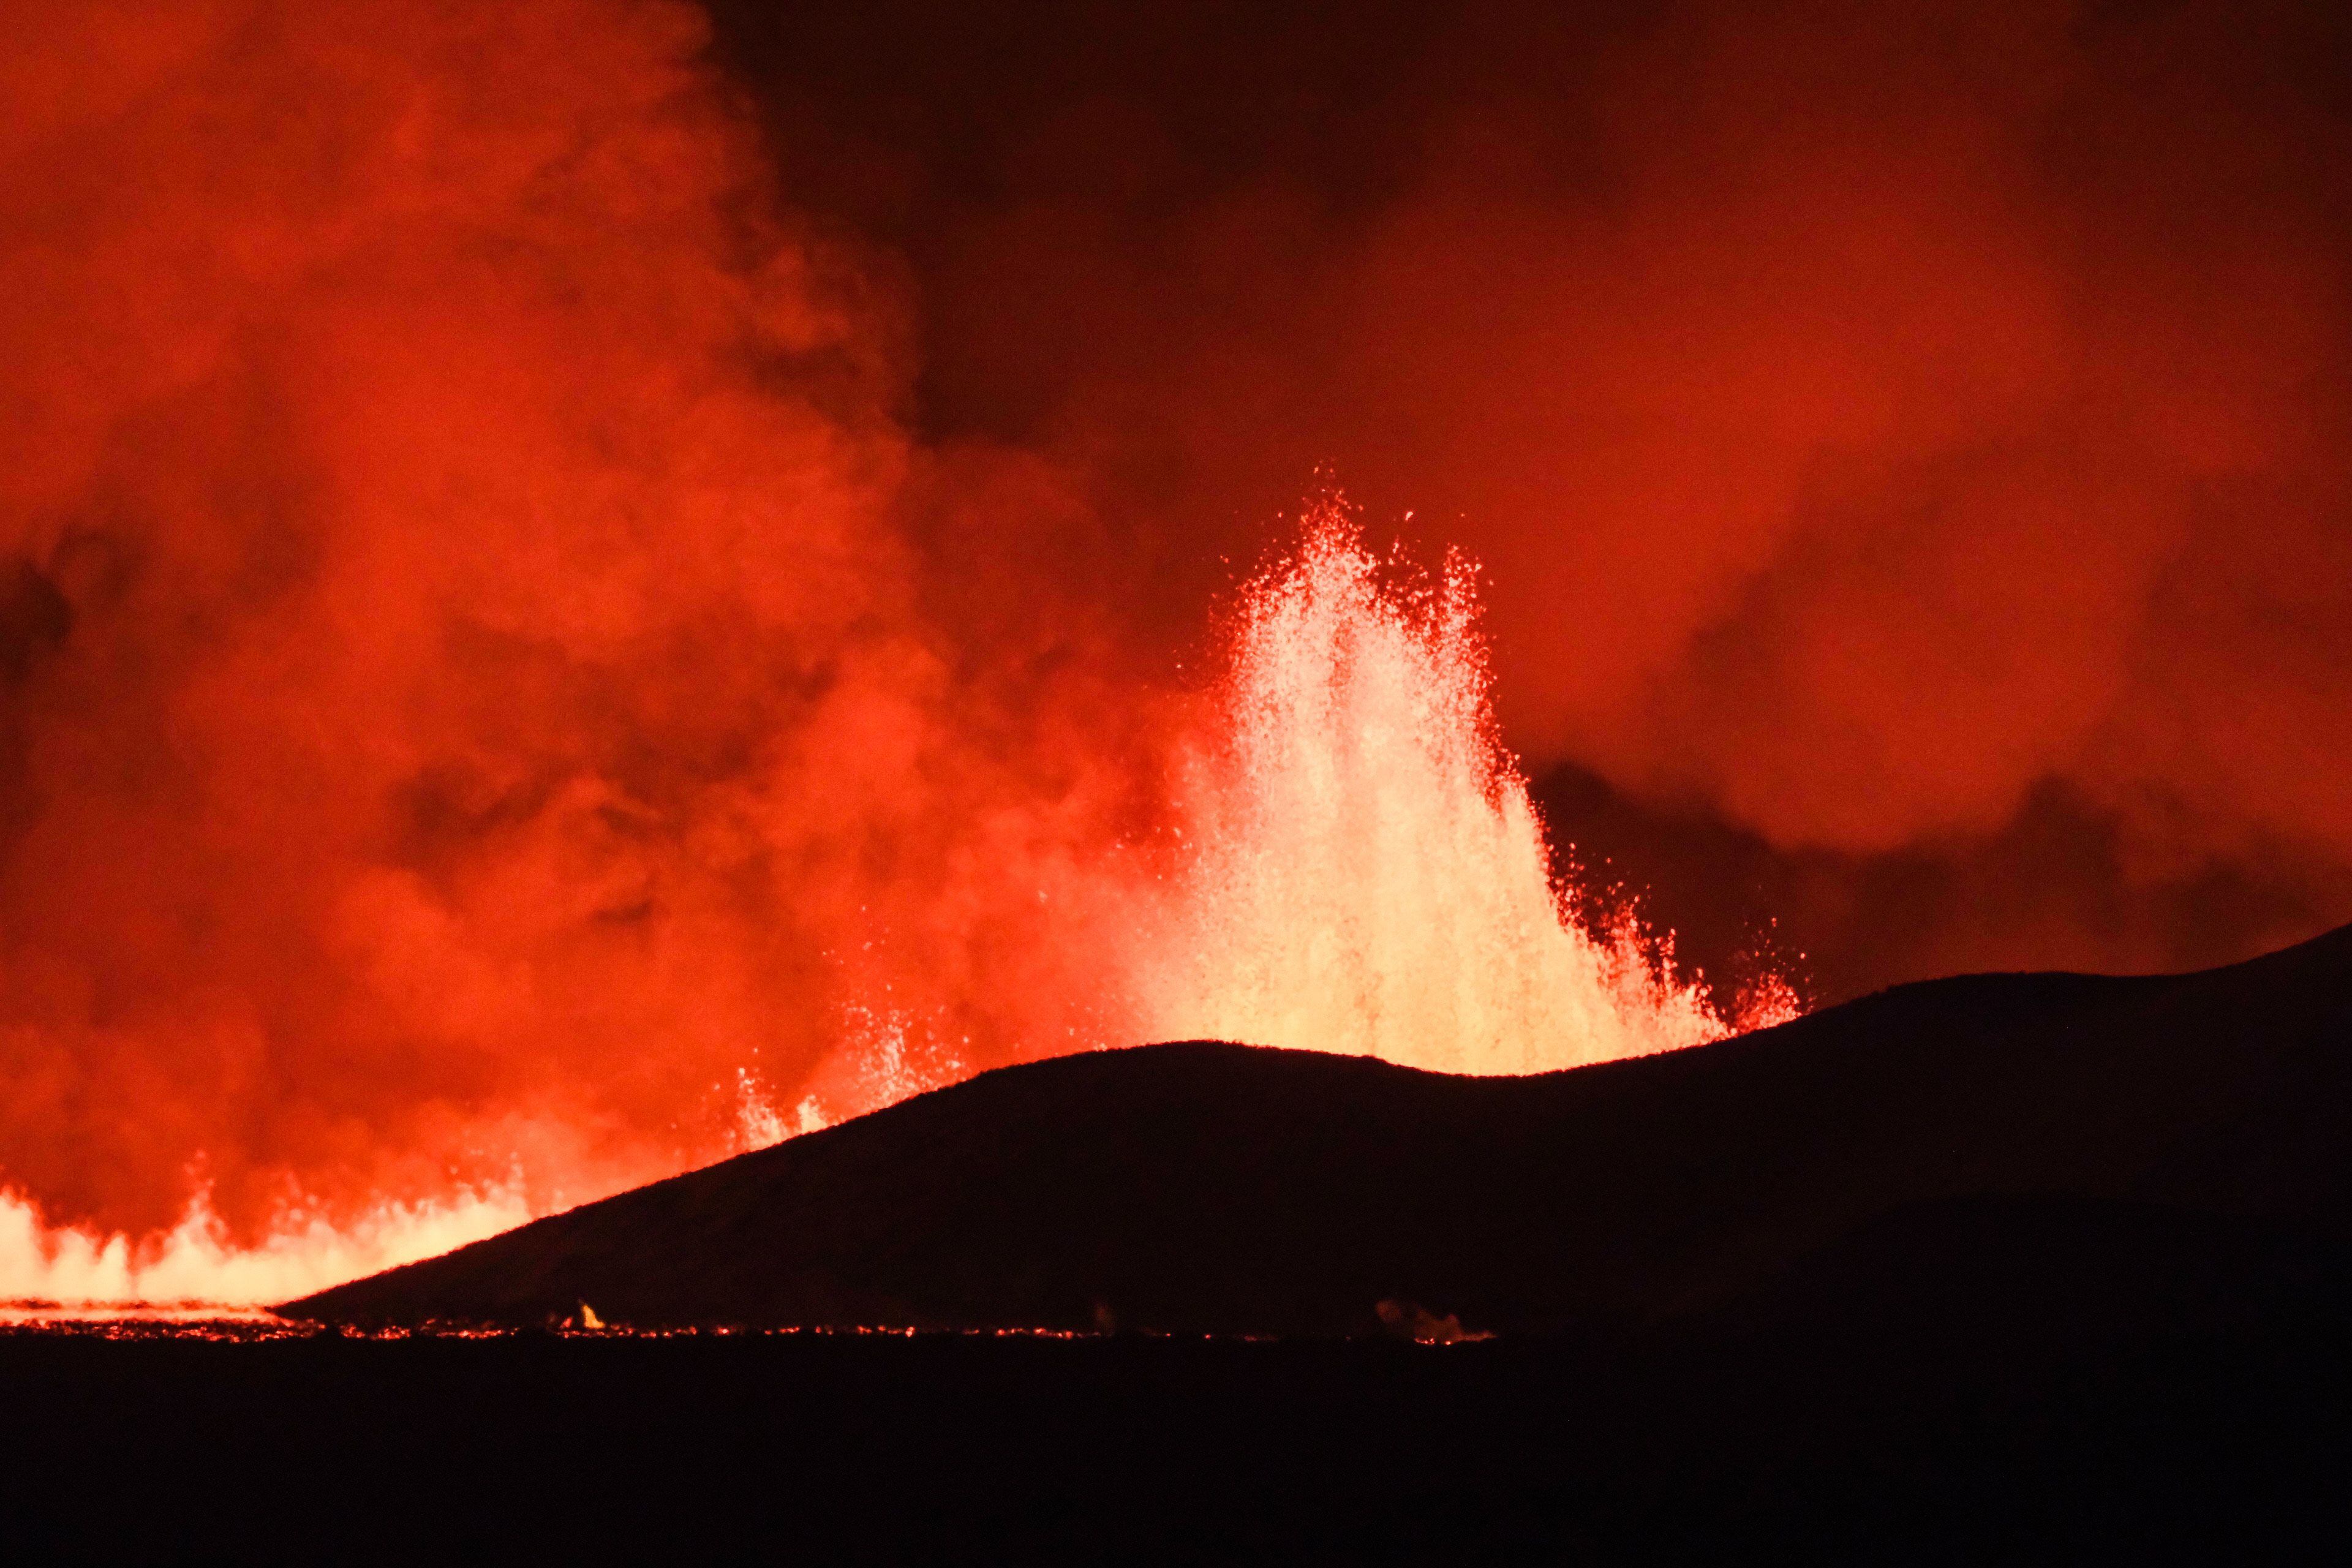 iceland volcano eruption: president warns of 'daunting' period as lava destroys homes